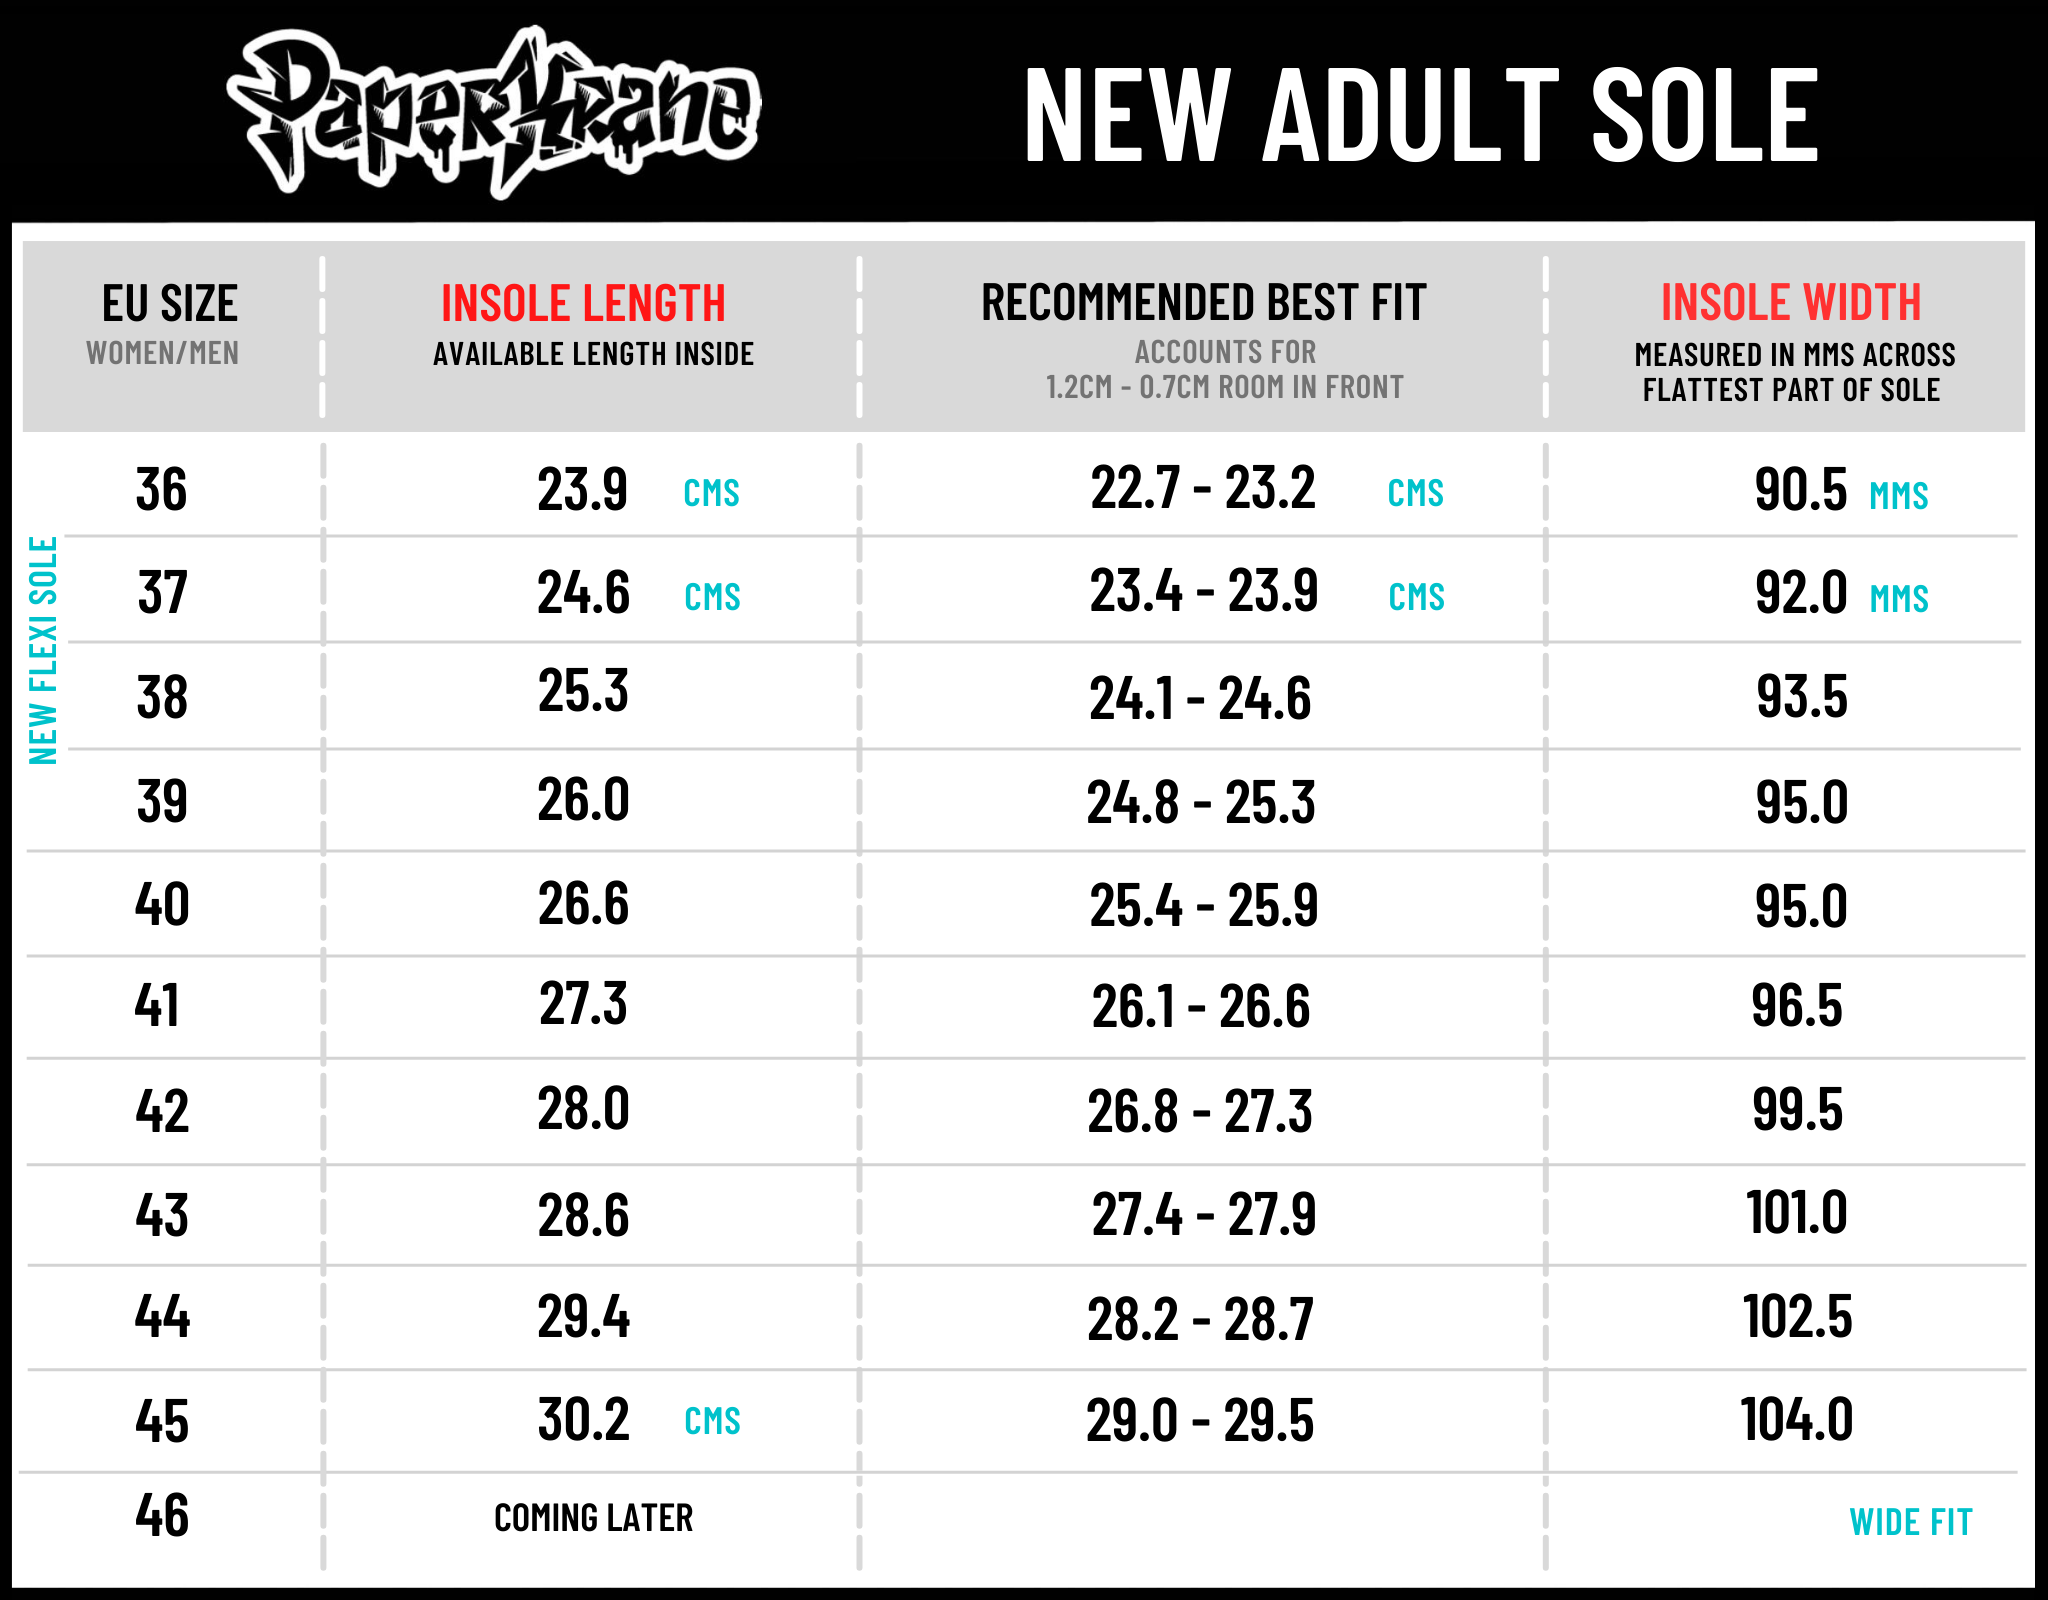 NEW ADULT SOLE SIZE CHART